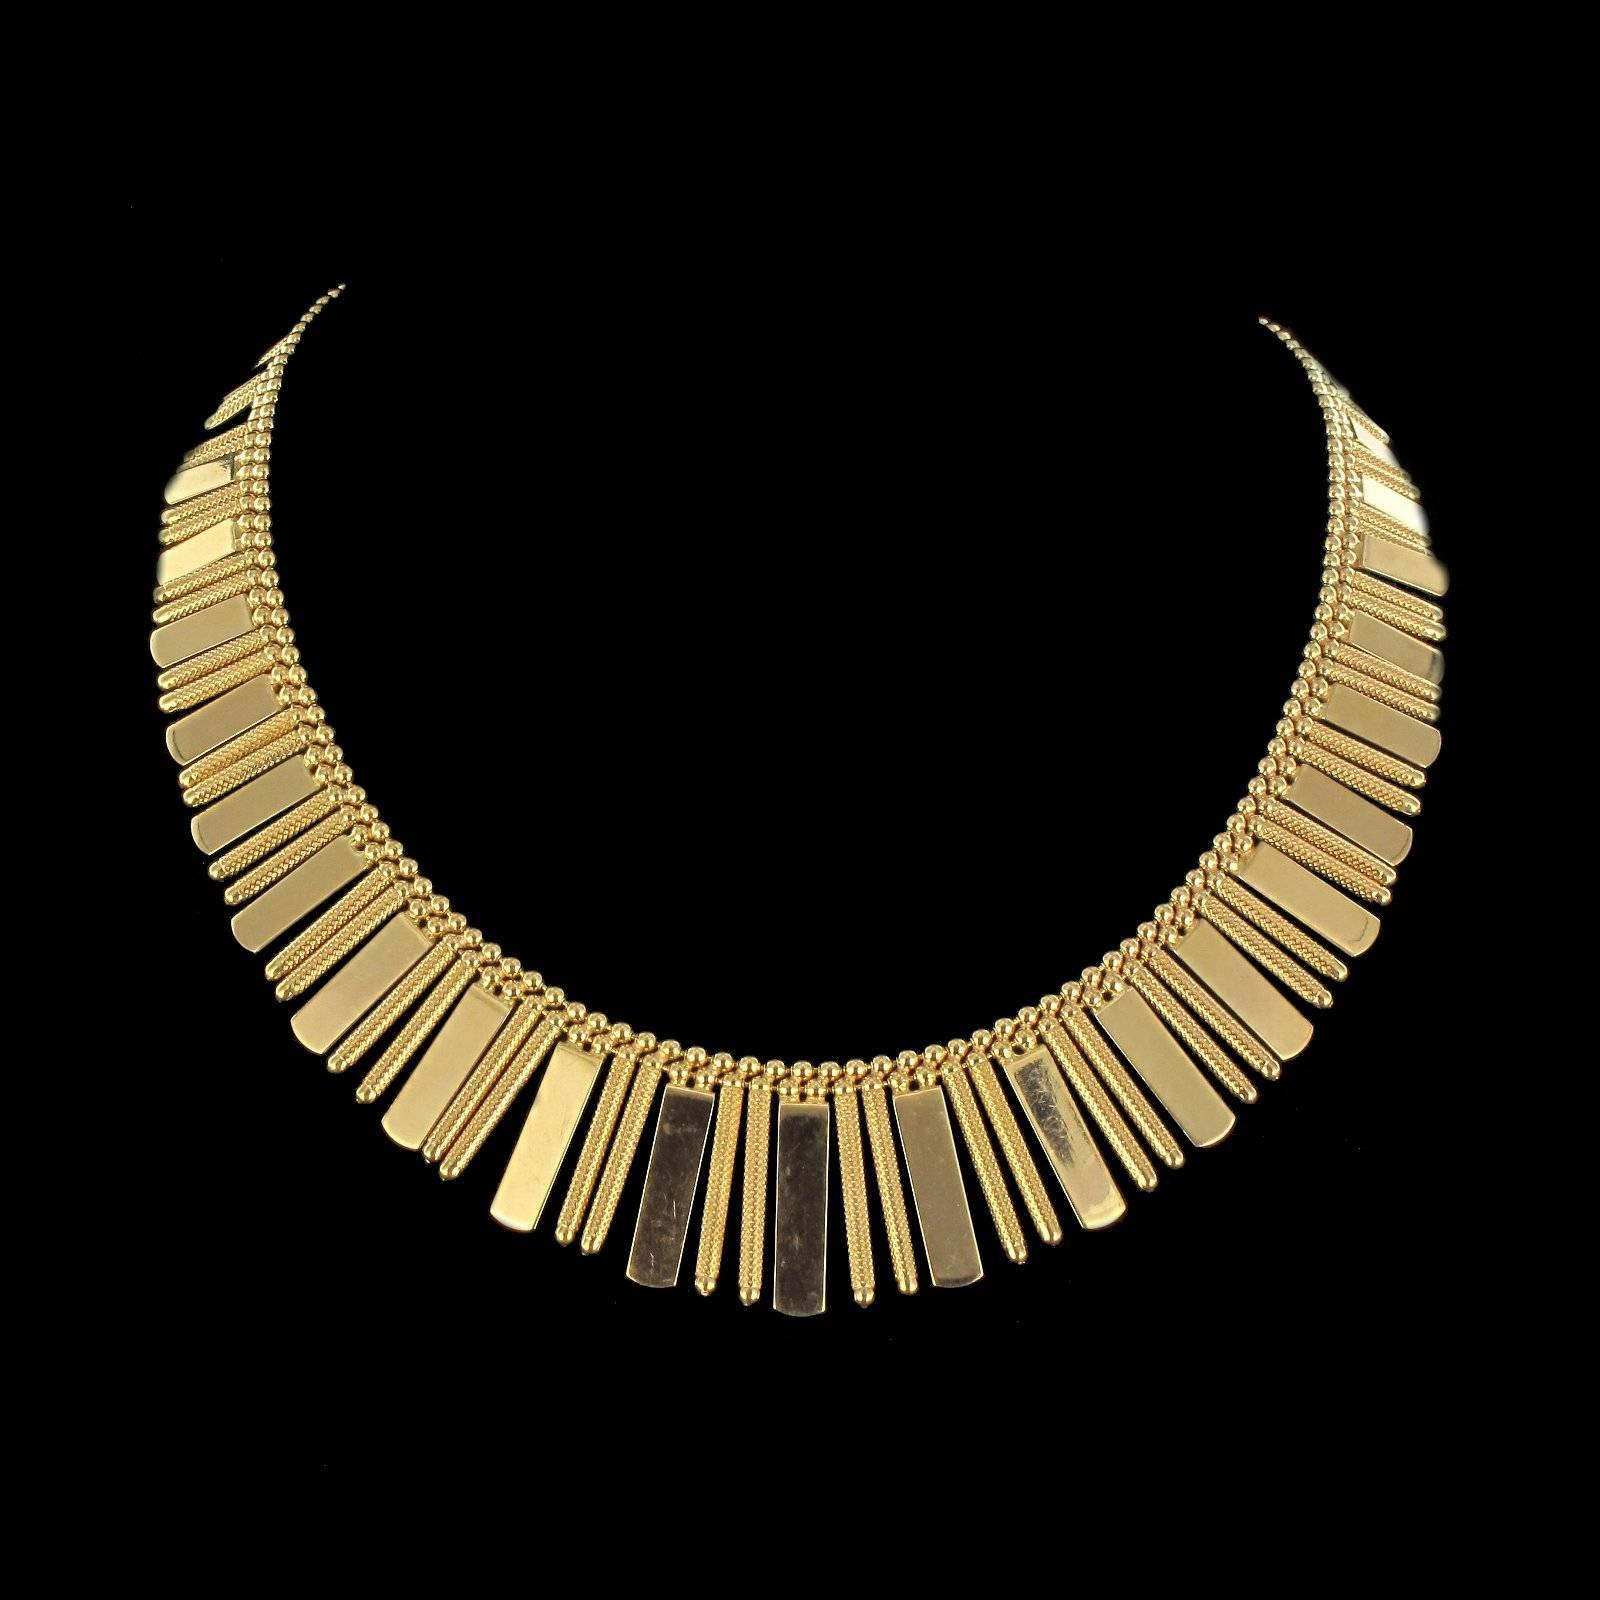 Necklace in 18 carat yellow gold. 
Composed of a double row of golden beads supporting a design formed of sets of 2 golden bars separated by golden beads holding flat gold plates chiselled on the front and smooth at the back. The clasp is a safety 8